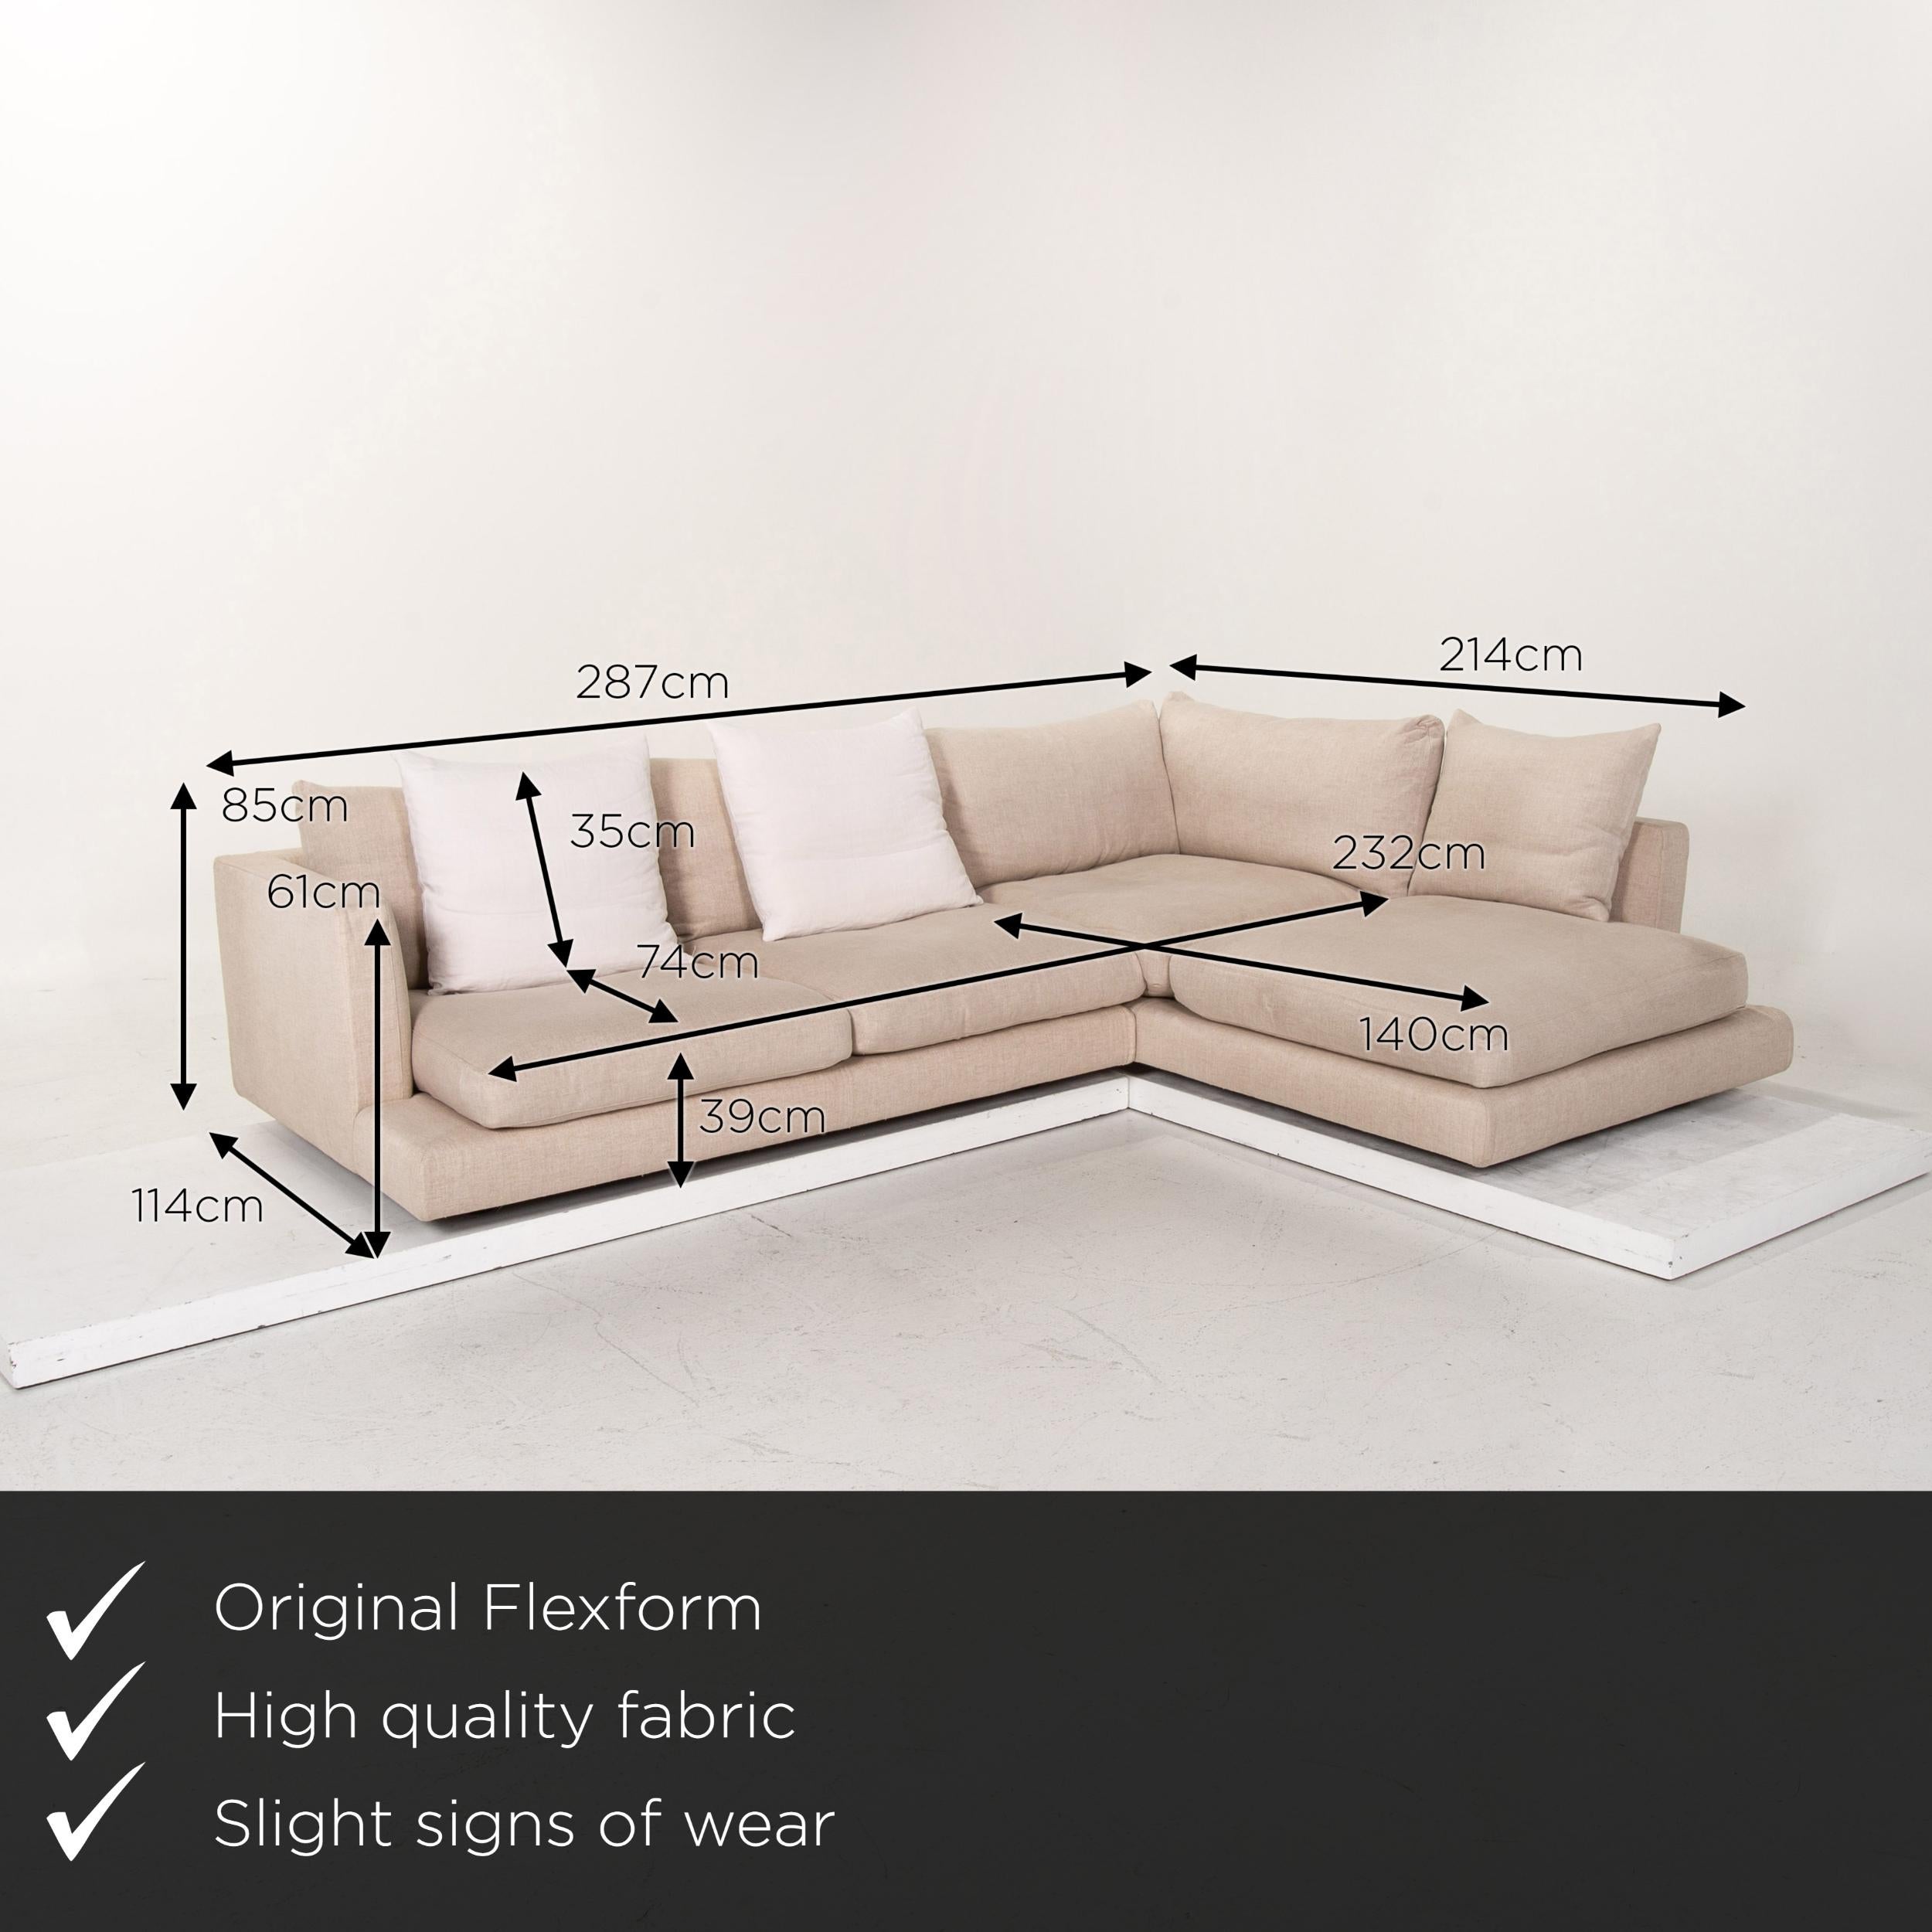 We present to you a Flexform Long Island fabric corner sofa cream sofa couch.


 Product measurements in centimeters:
 

Depth 114
Width 287
Height 85
Seat height 39
Rest height 61
Seat depth 74
Seat width 232
Back height 35.
 